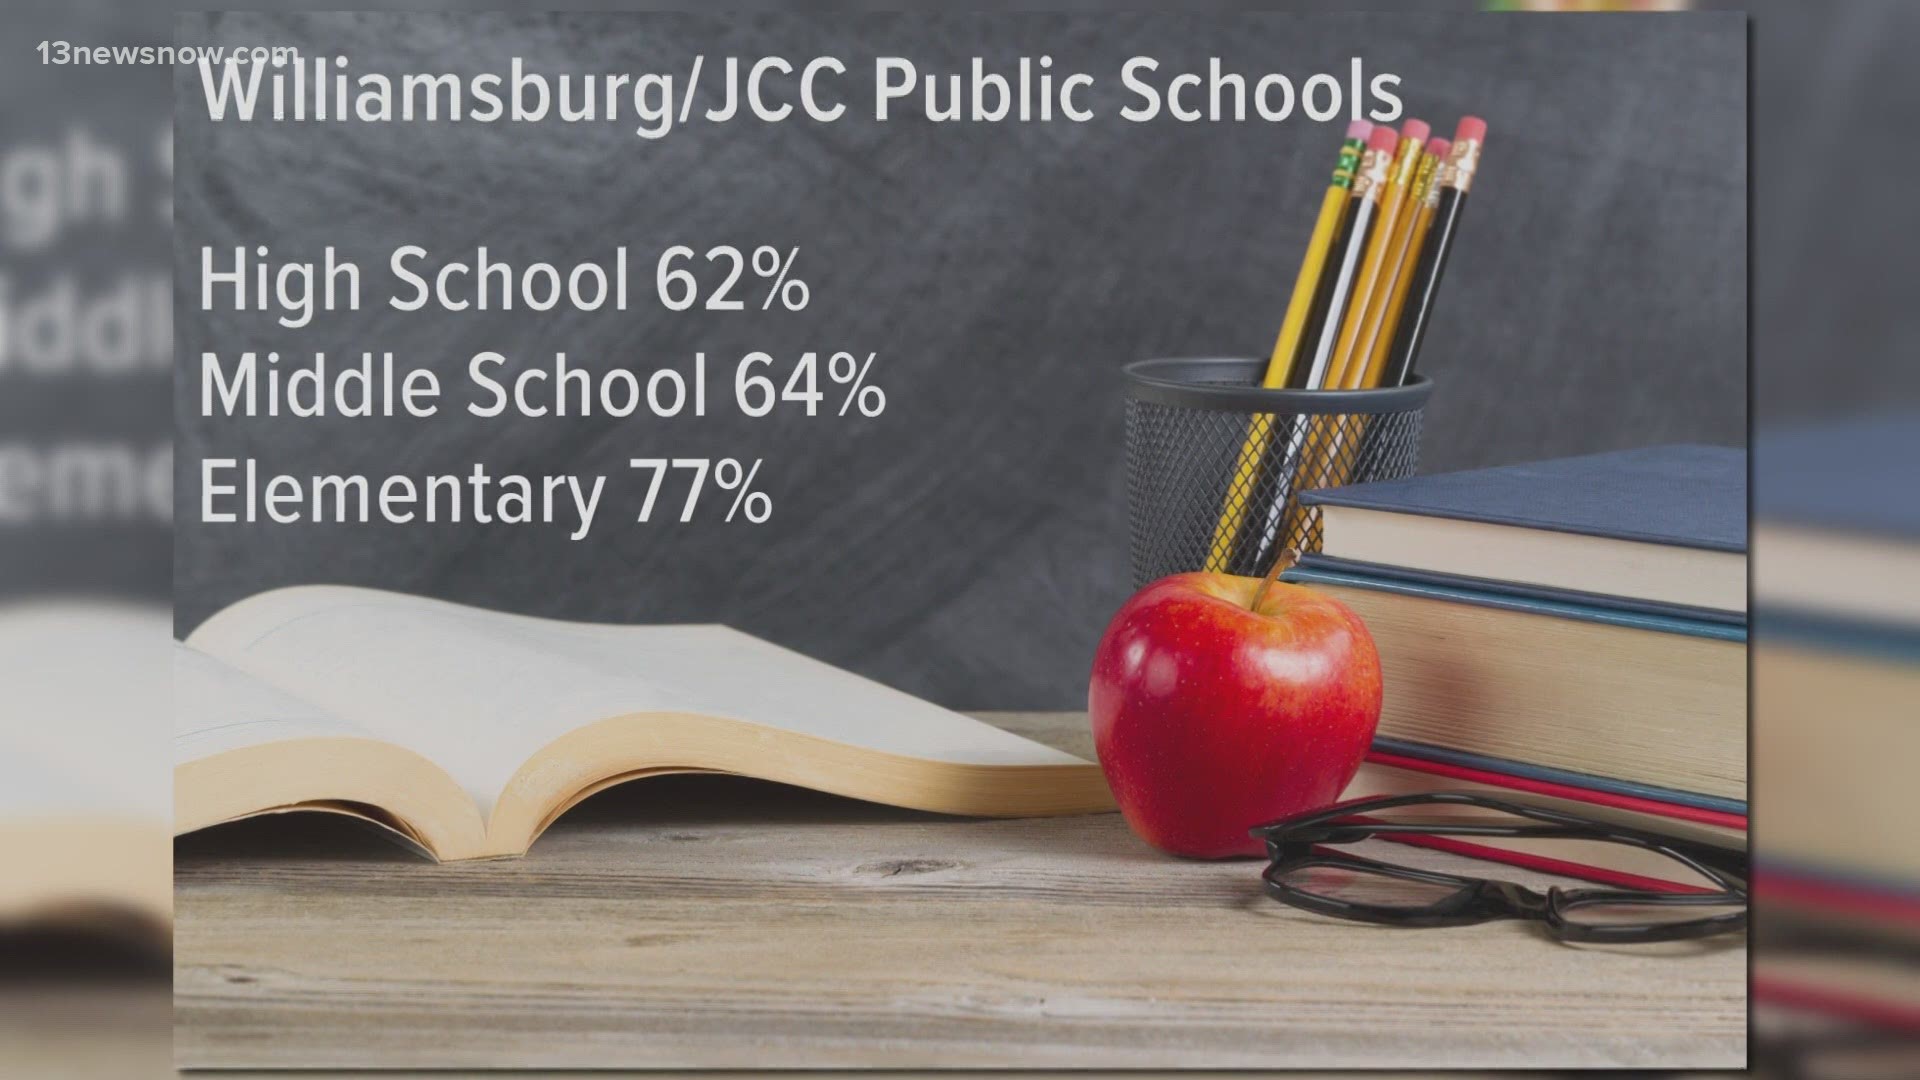 Norfolk Public Schools has one of the highest percentages of students returning to the buildings.